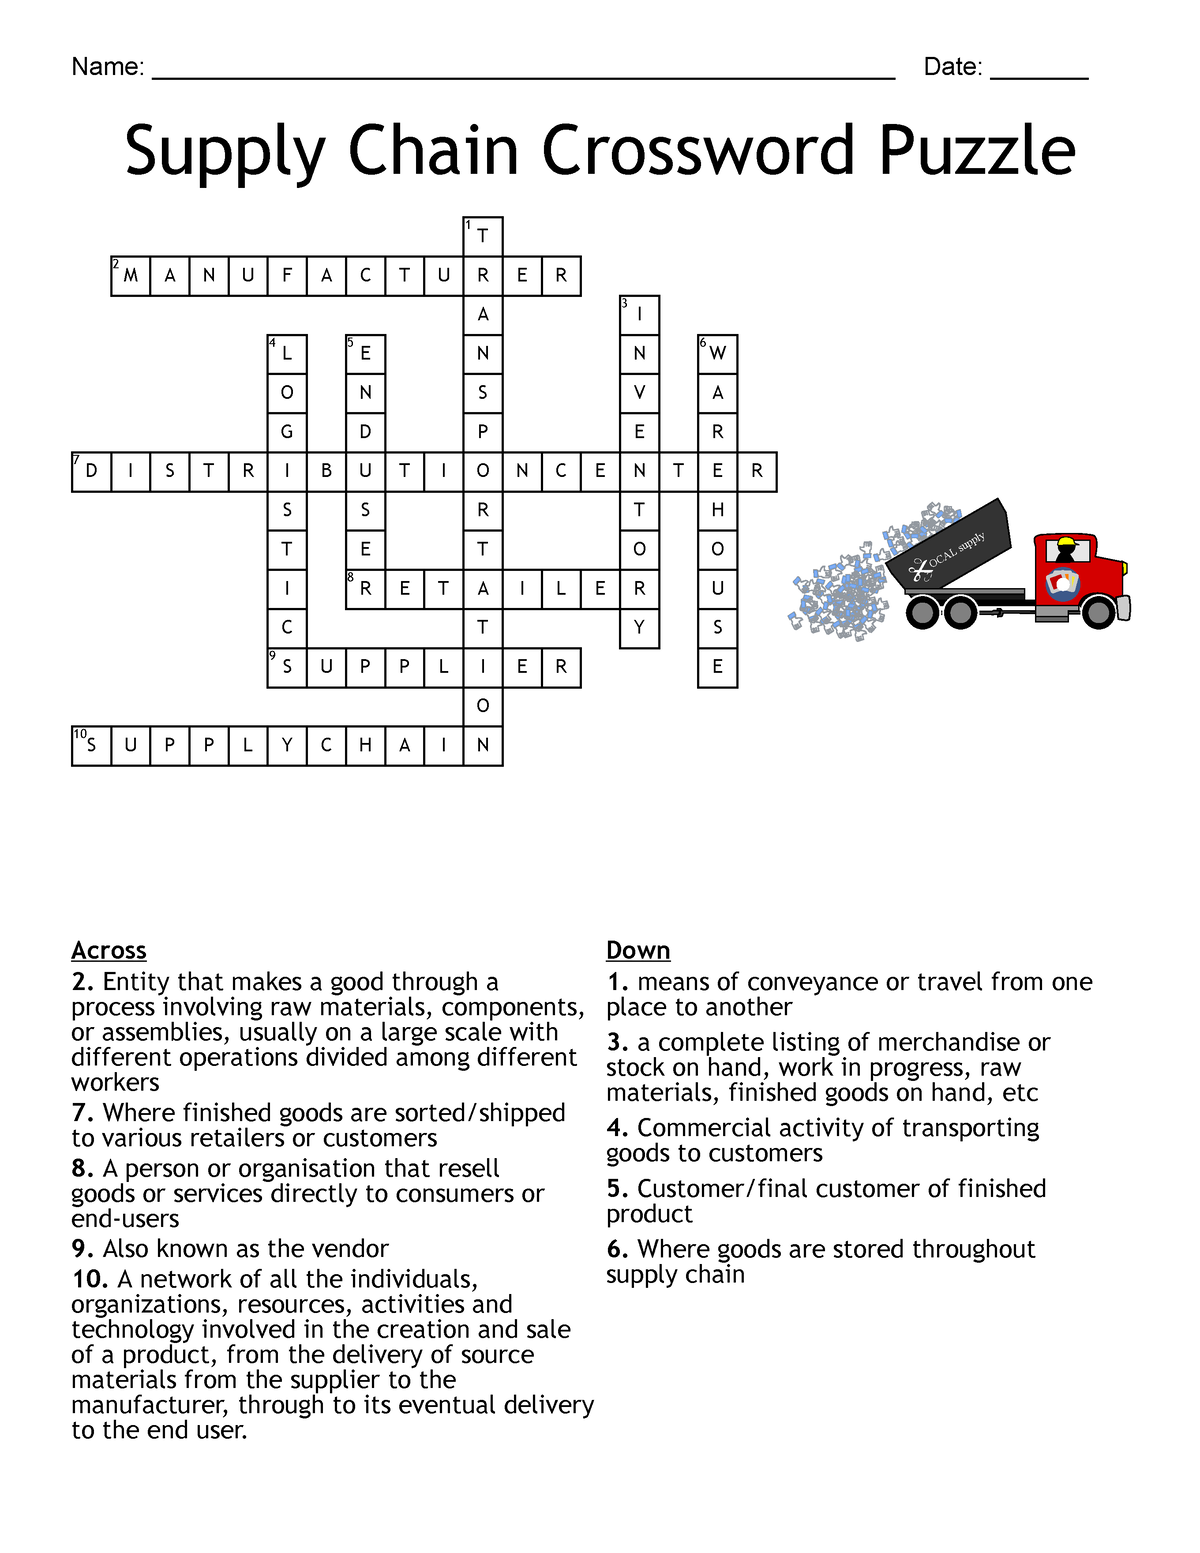 Supply Chain Crossword Puzzle answer key d7a01 62ed61a4 Name: Studocu